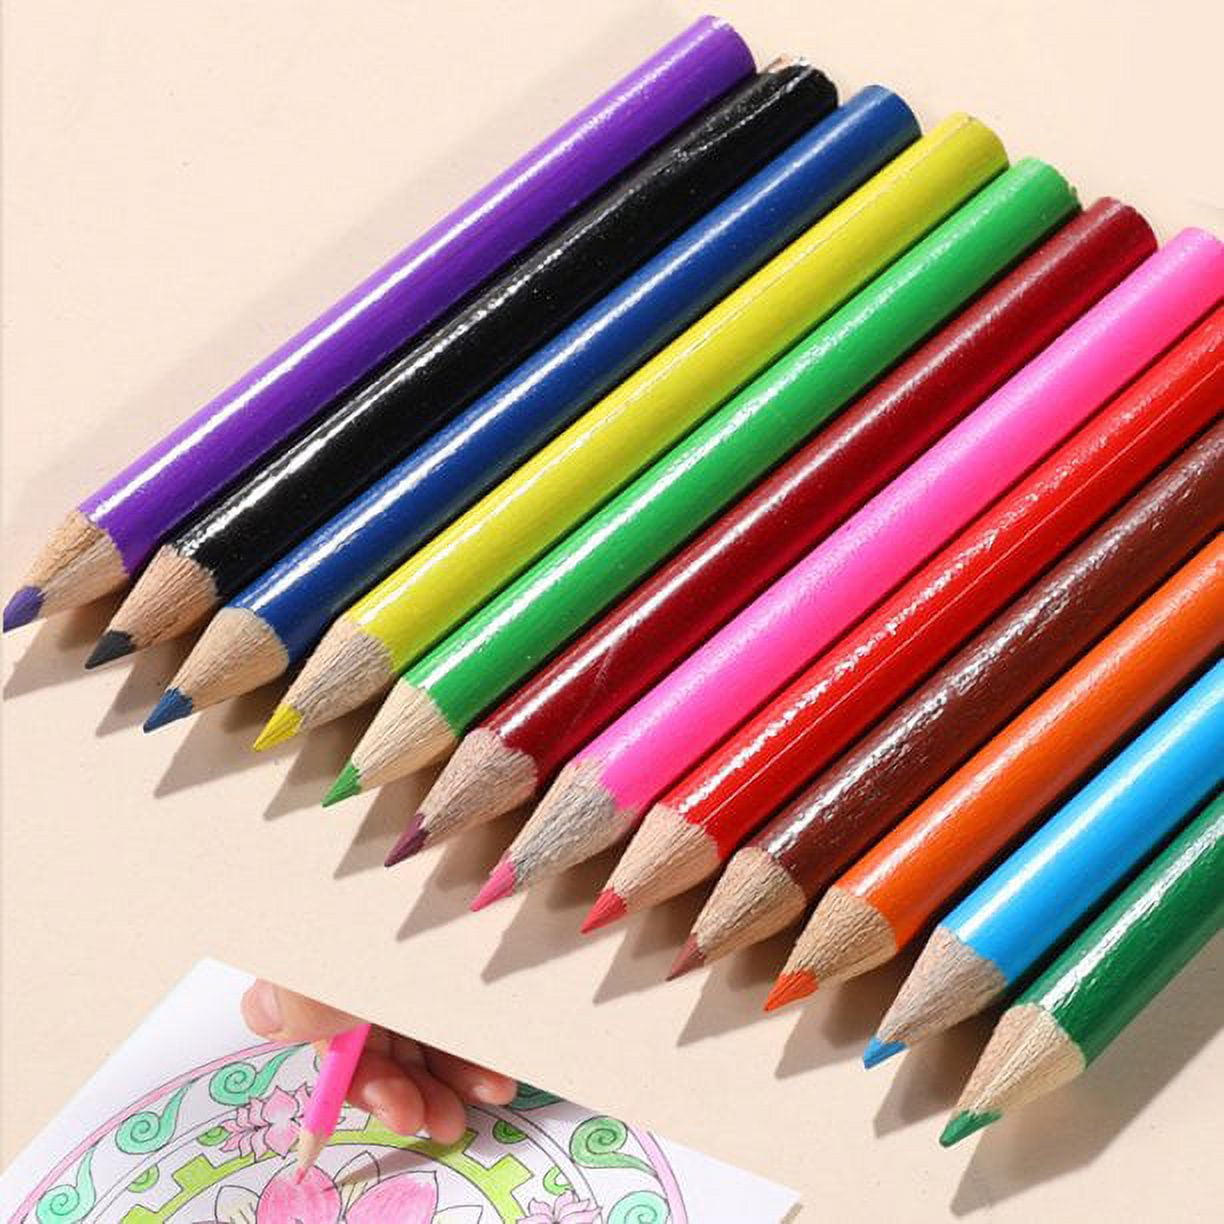  Alloytop 226 Pcs Art and Craft Supplies Colored Pencils -  School Supplies Kit Painting Drawing Sketching Coloring Teens Girls Boys  Kids Ages 6 7 8 9 10 11 12 Years Old with Oil Pastels Crayons